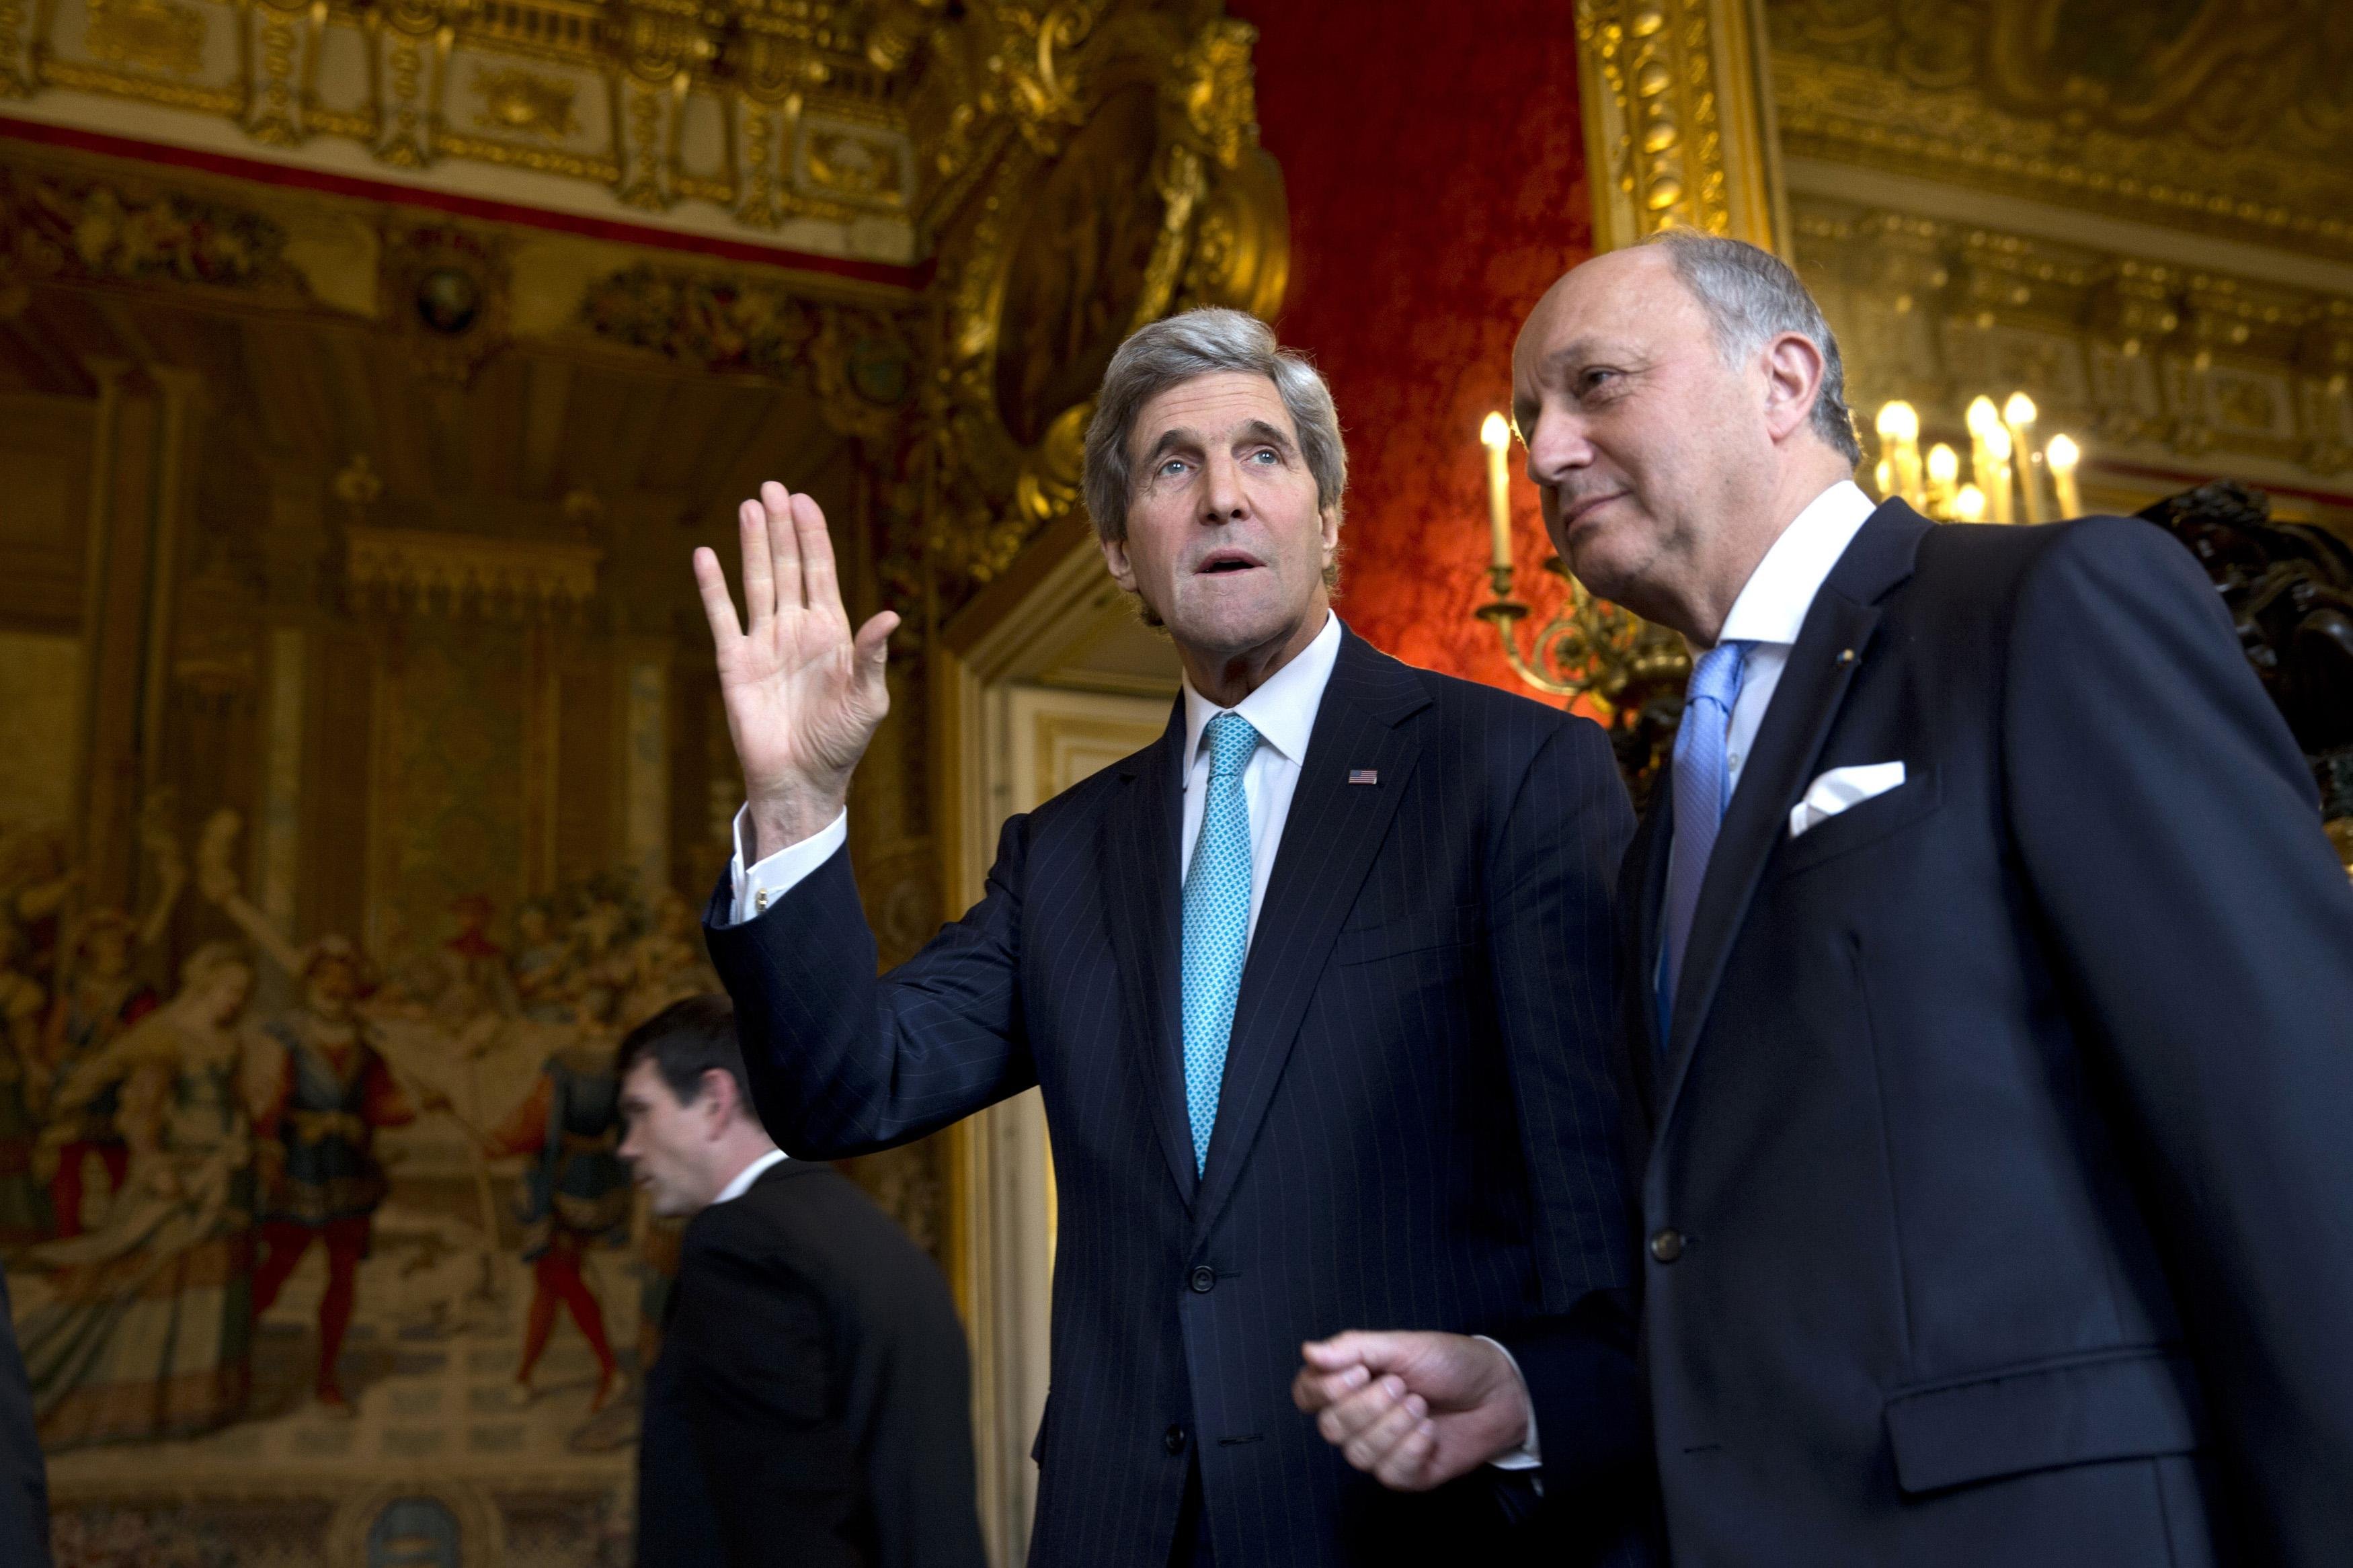 From left: U.S. Secretary of State John Kerry waves to the waiting media as he walks with French Foreign Minister Laurent Fabius for their meeting at the Quai d'Orsay in Paris, on March 30, 2014. (Jacquelyn Martin—Reuters)